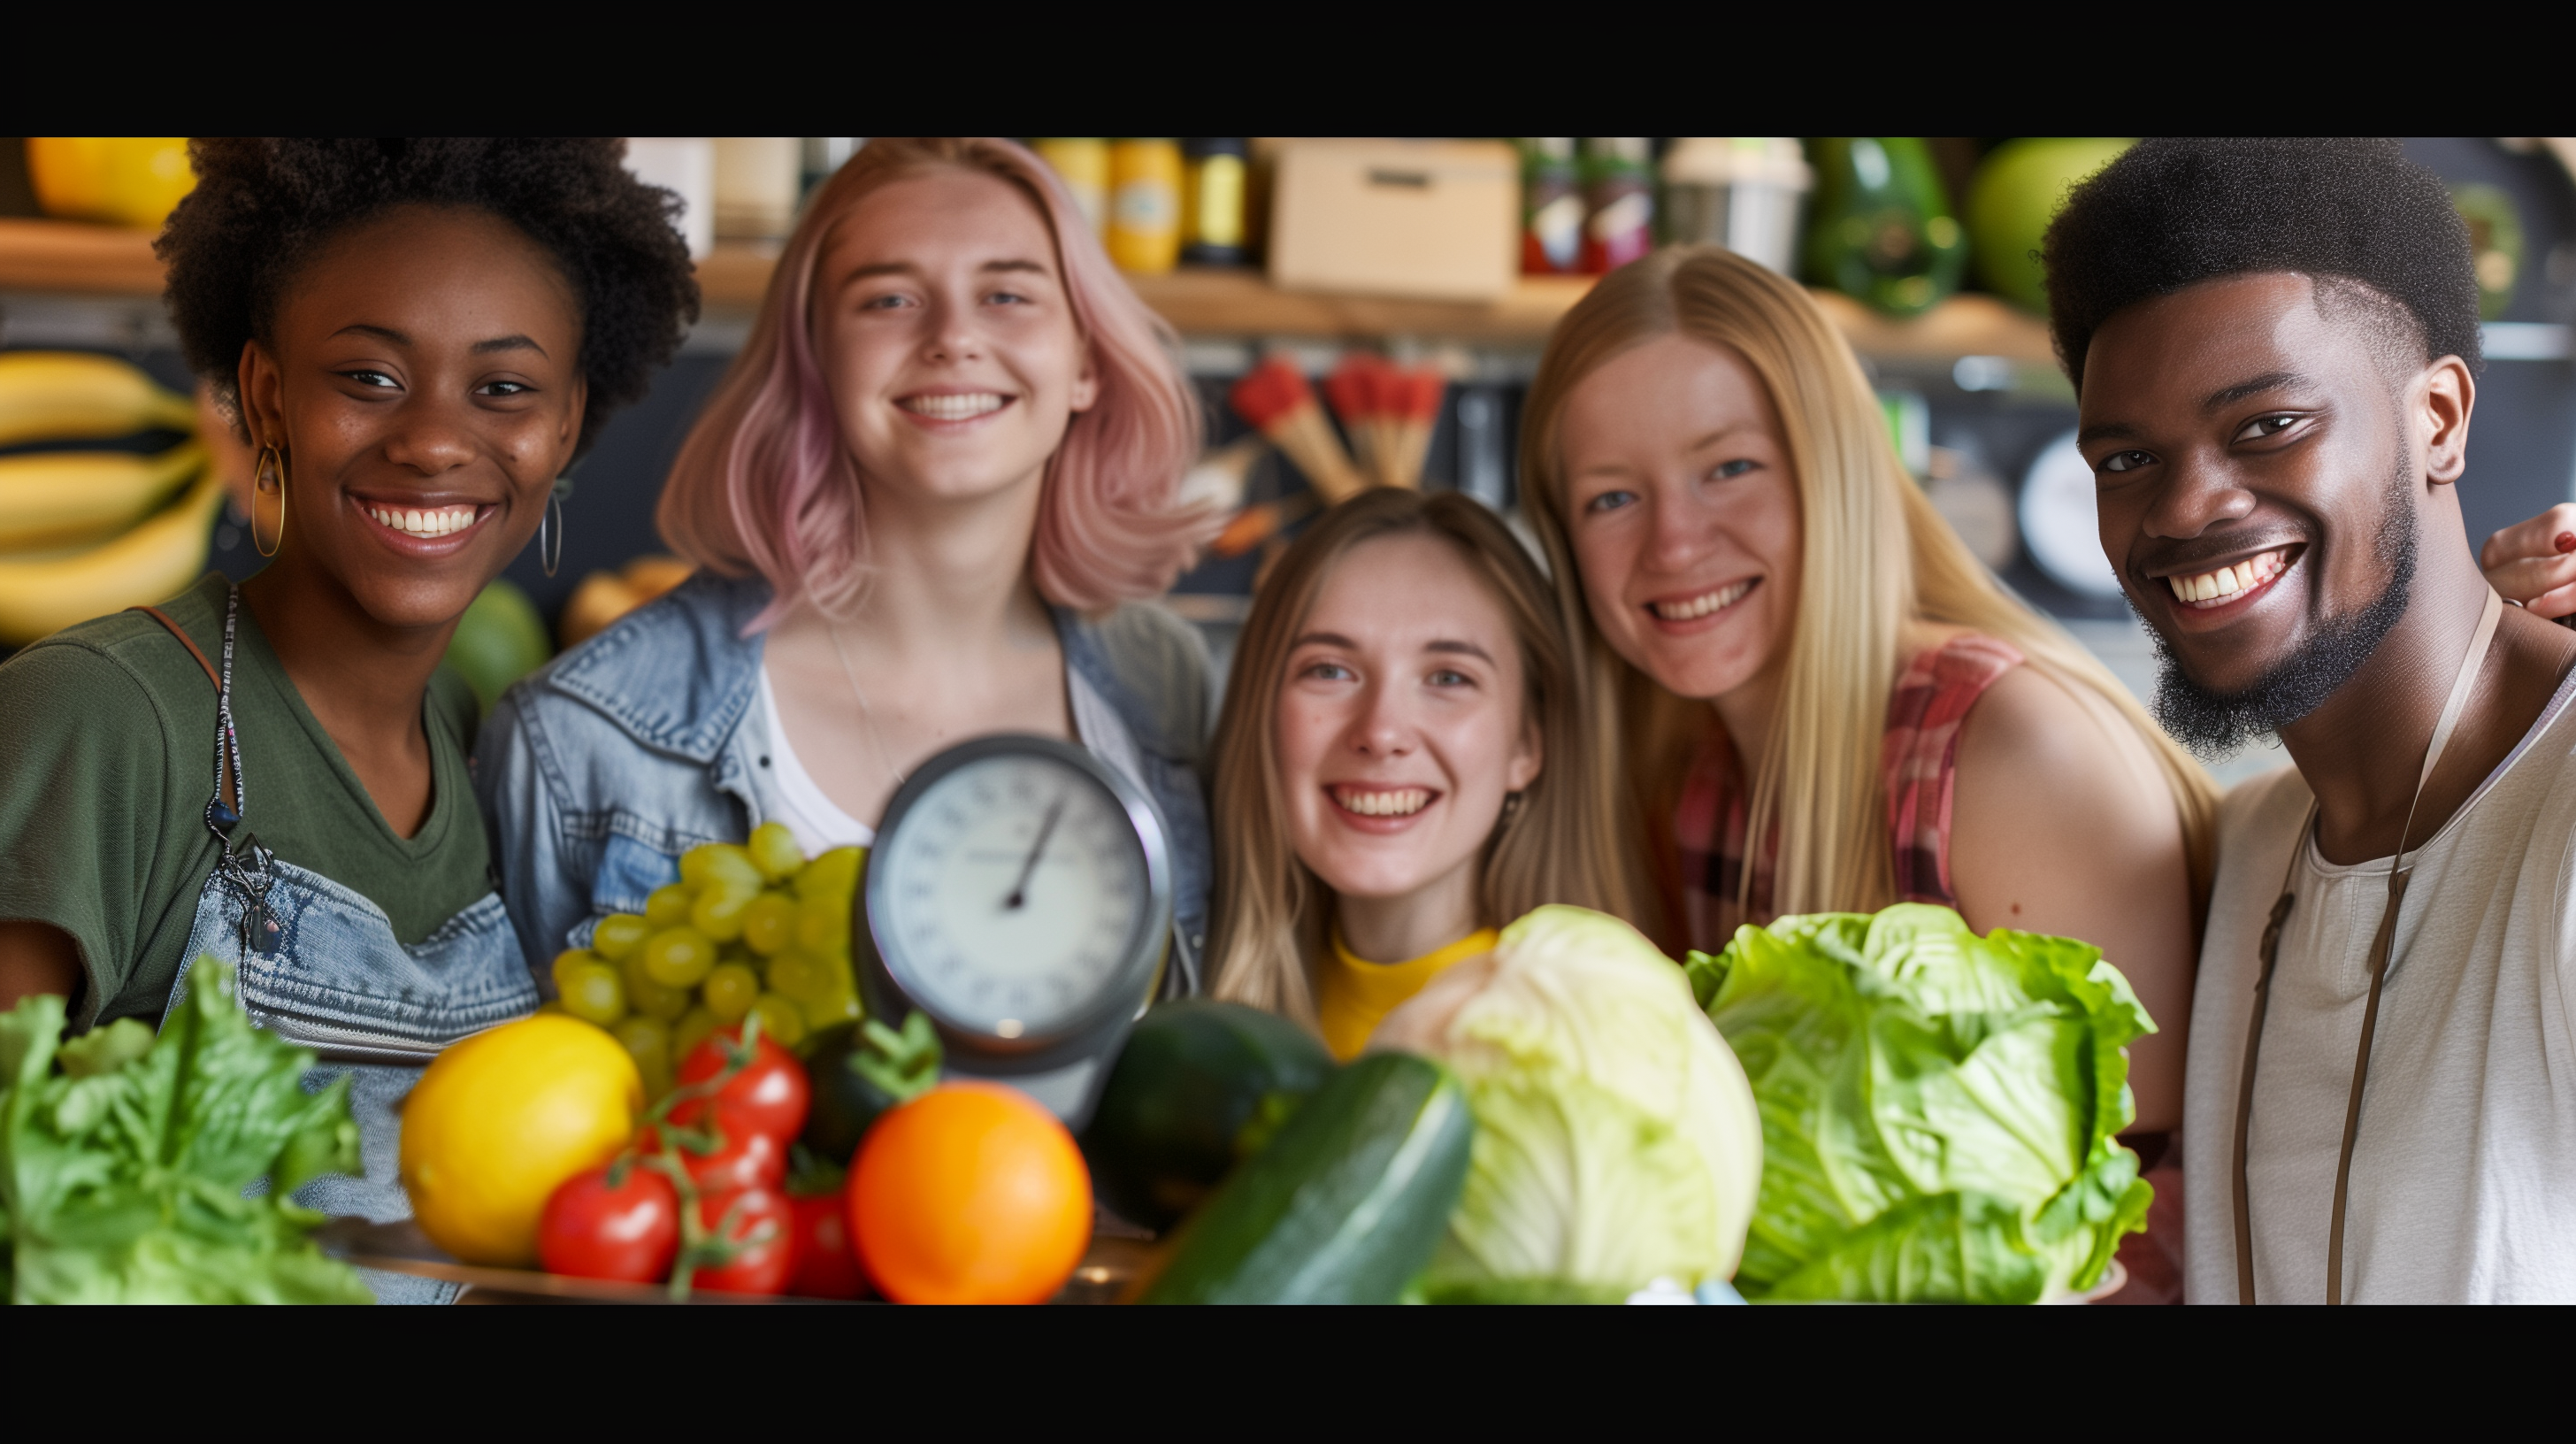 diverse individuals smiling, holding a scale showing weight loss, surrounded by fruits, vegetables, and probiotic supplements